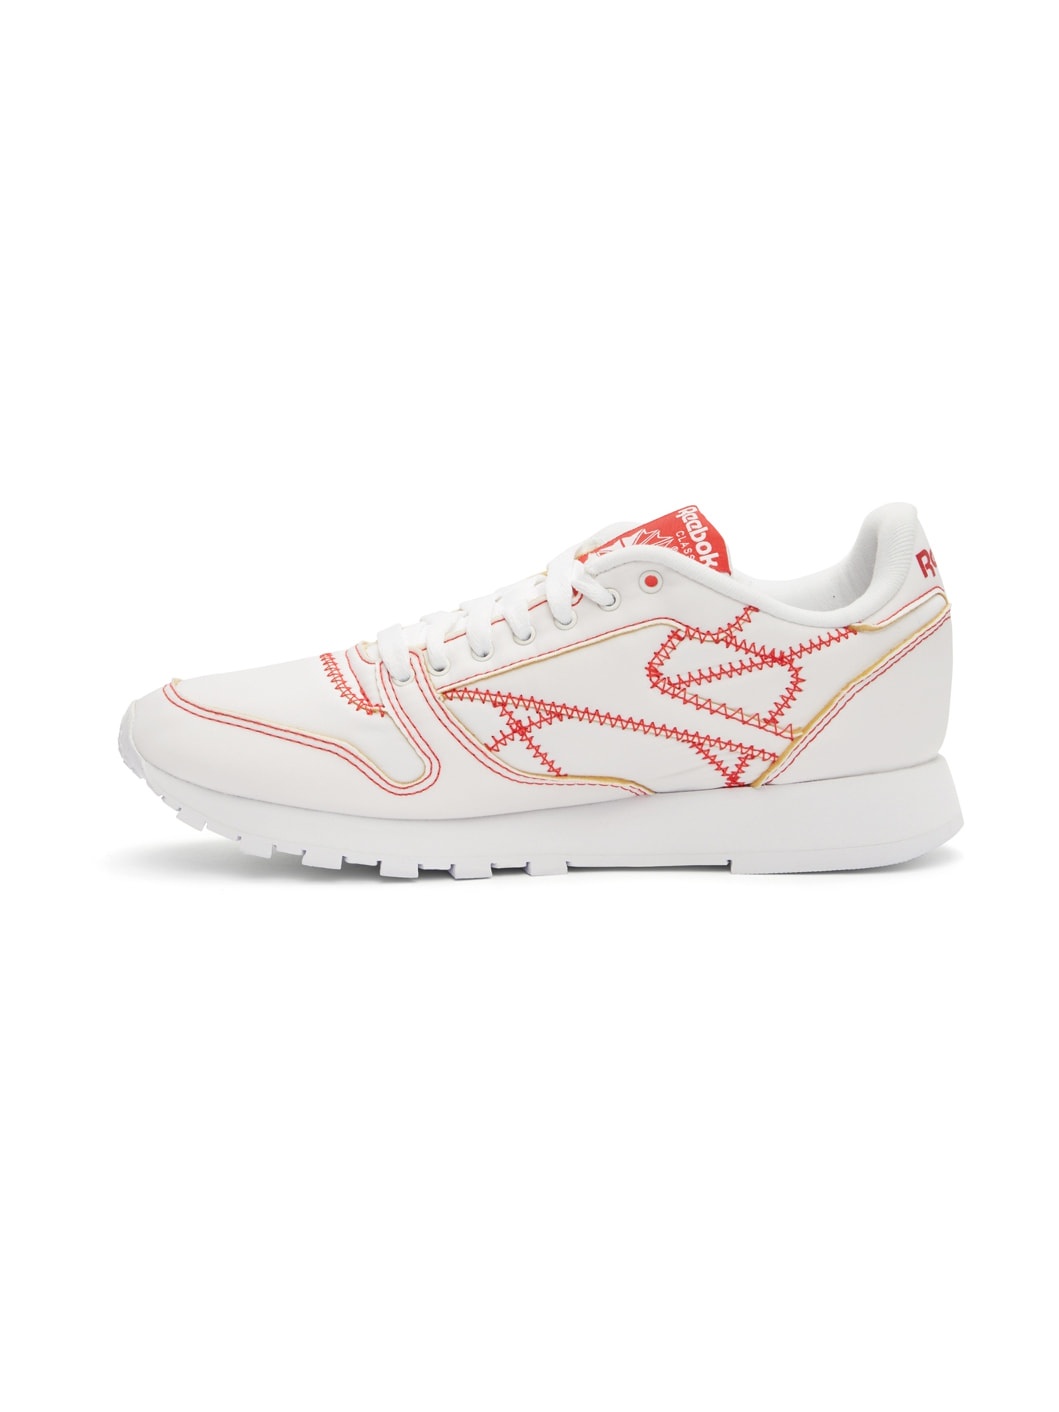 White Reebok Classic Edition Sneakers - 3